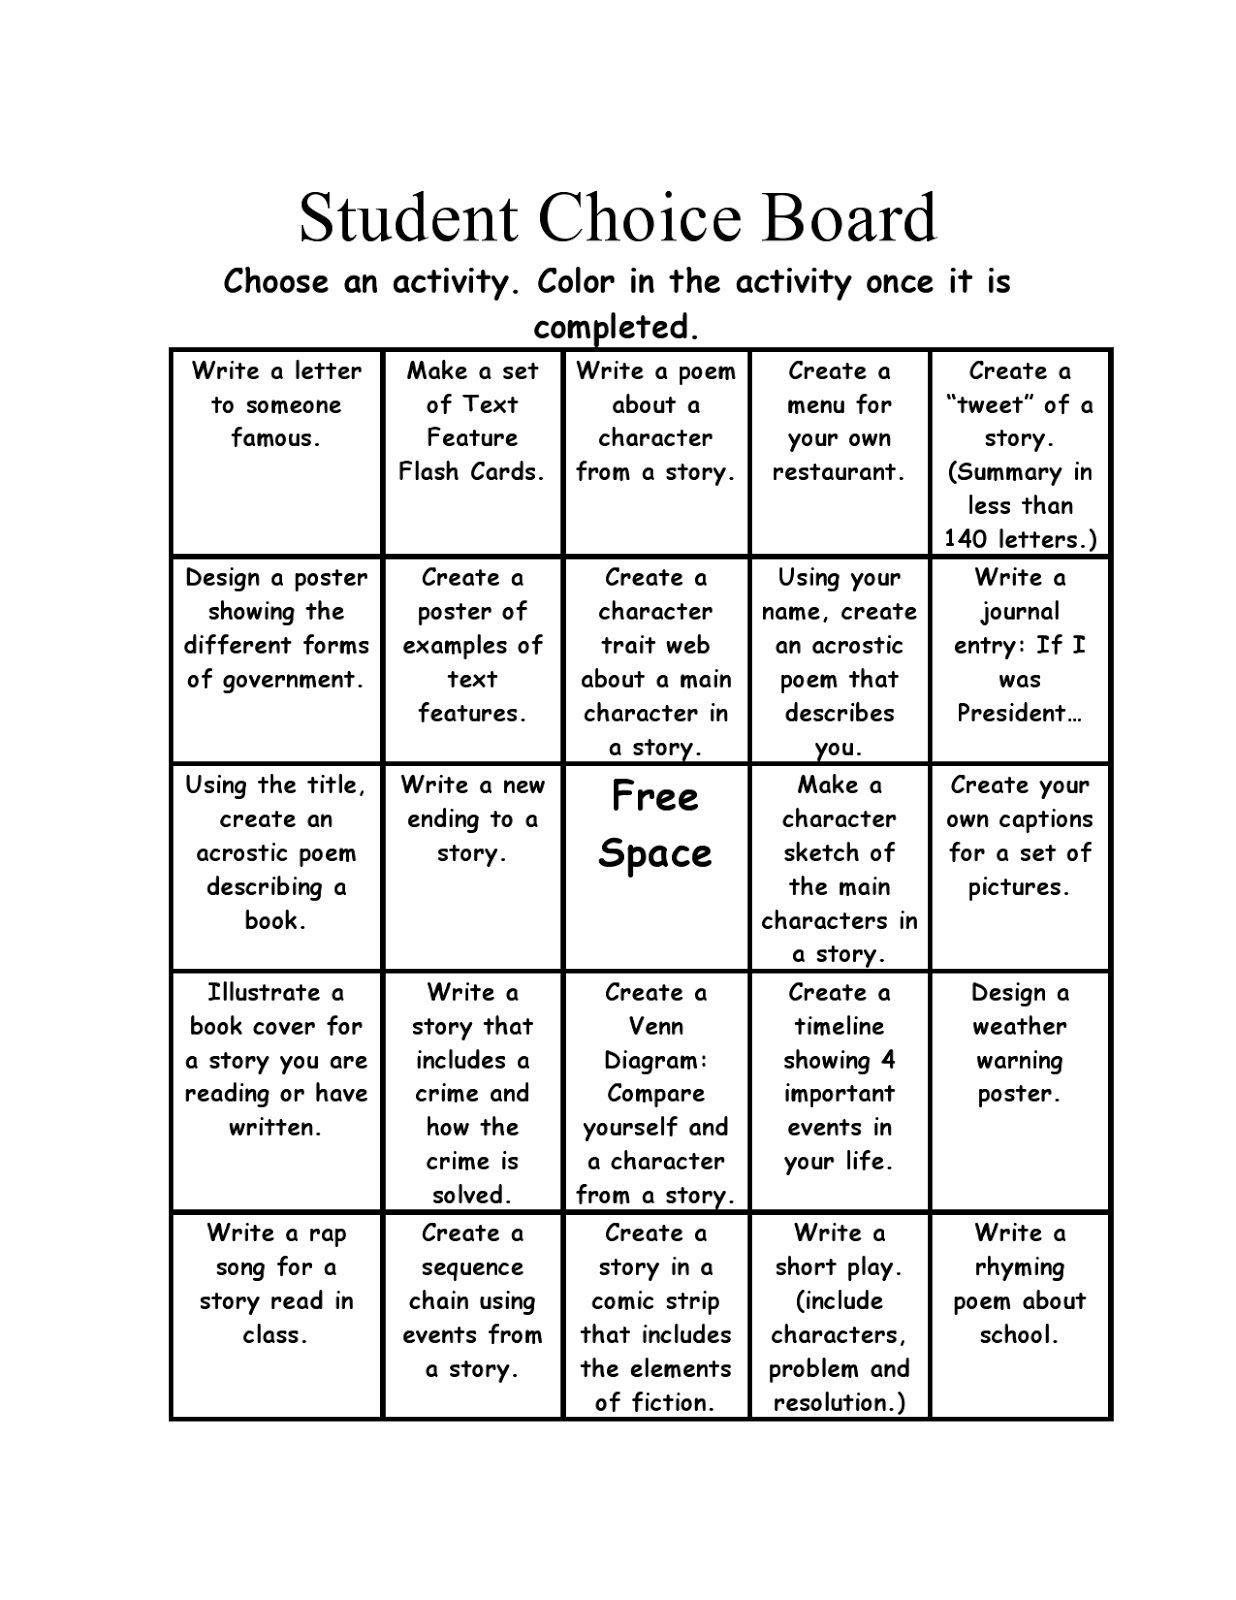 Adventures of Teaching: Choice Board I can see turning this into engineering/invention spins for cross curriculum writing